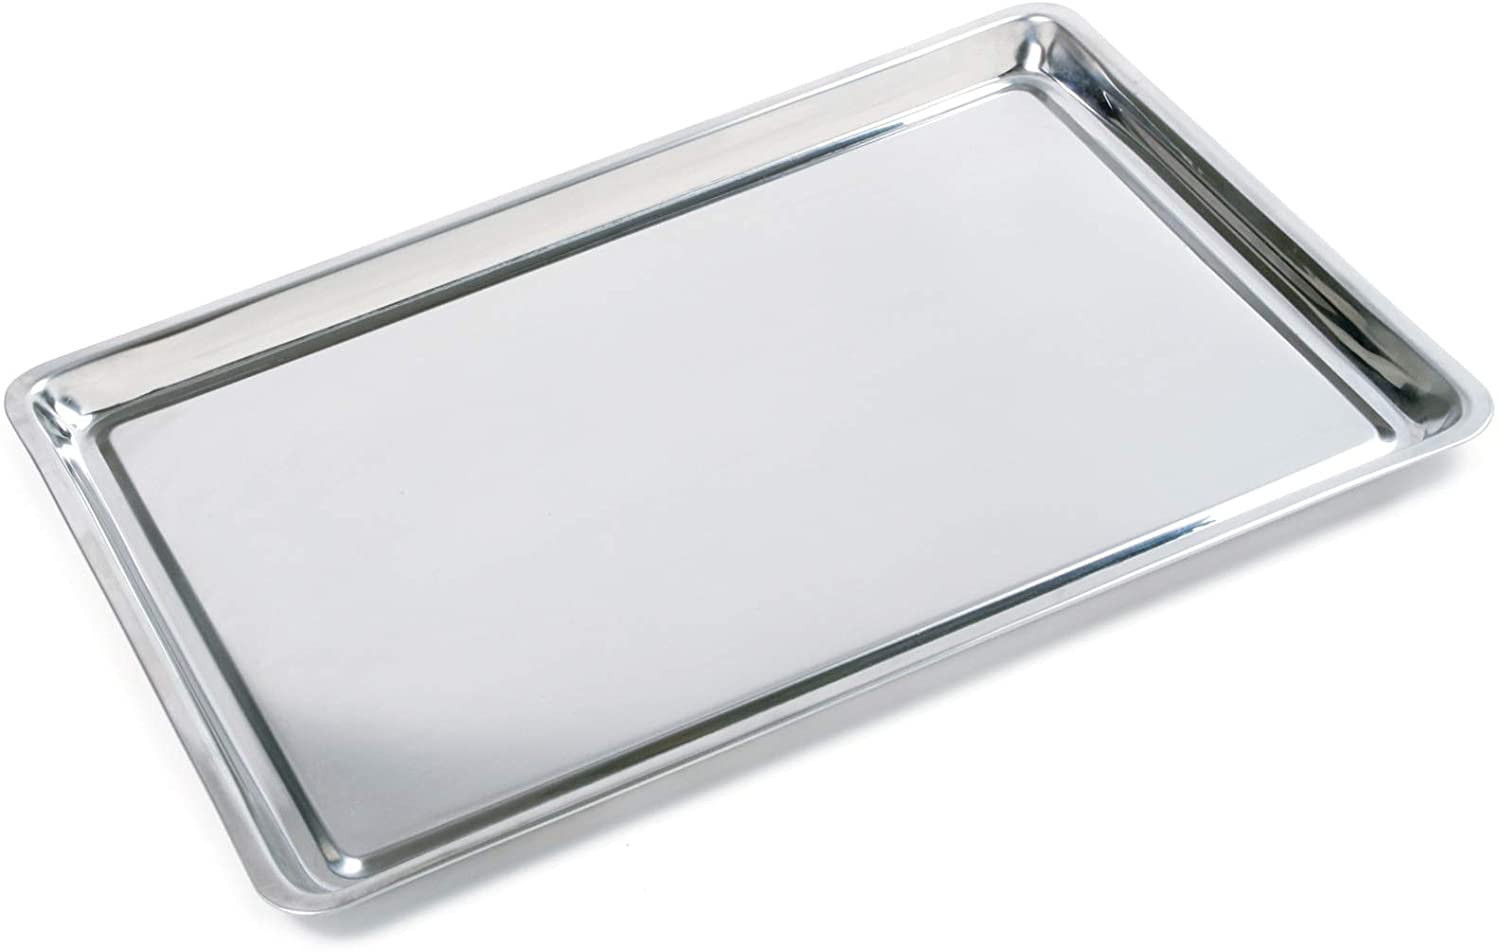 Norpro Stainless Steel Jelly Roll Pan